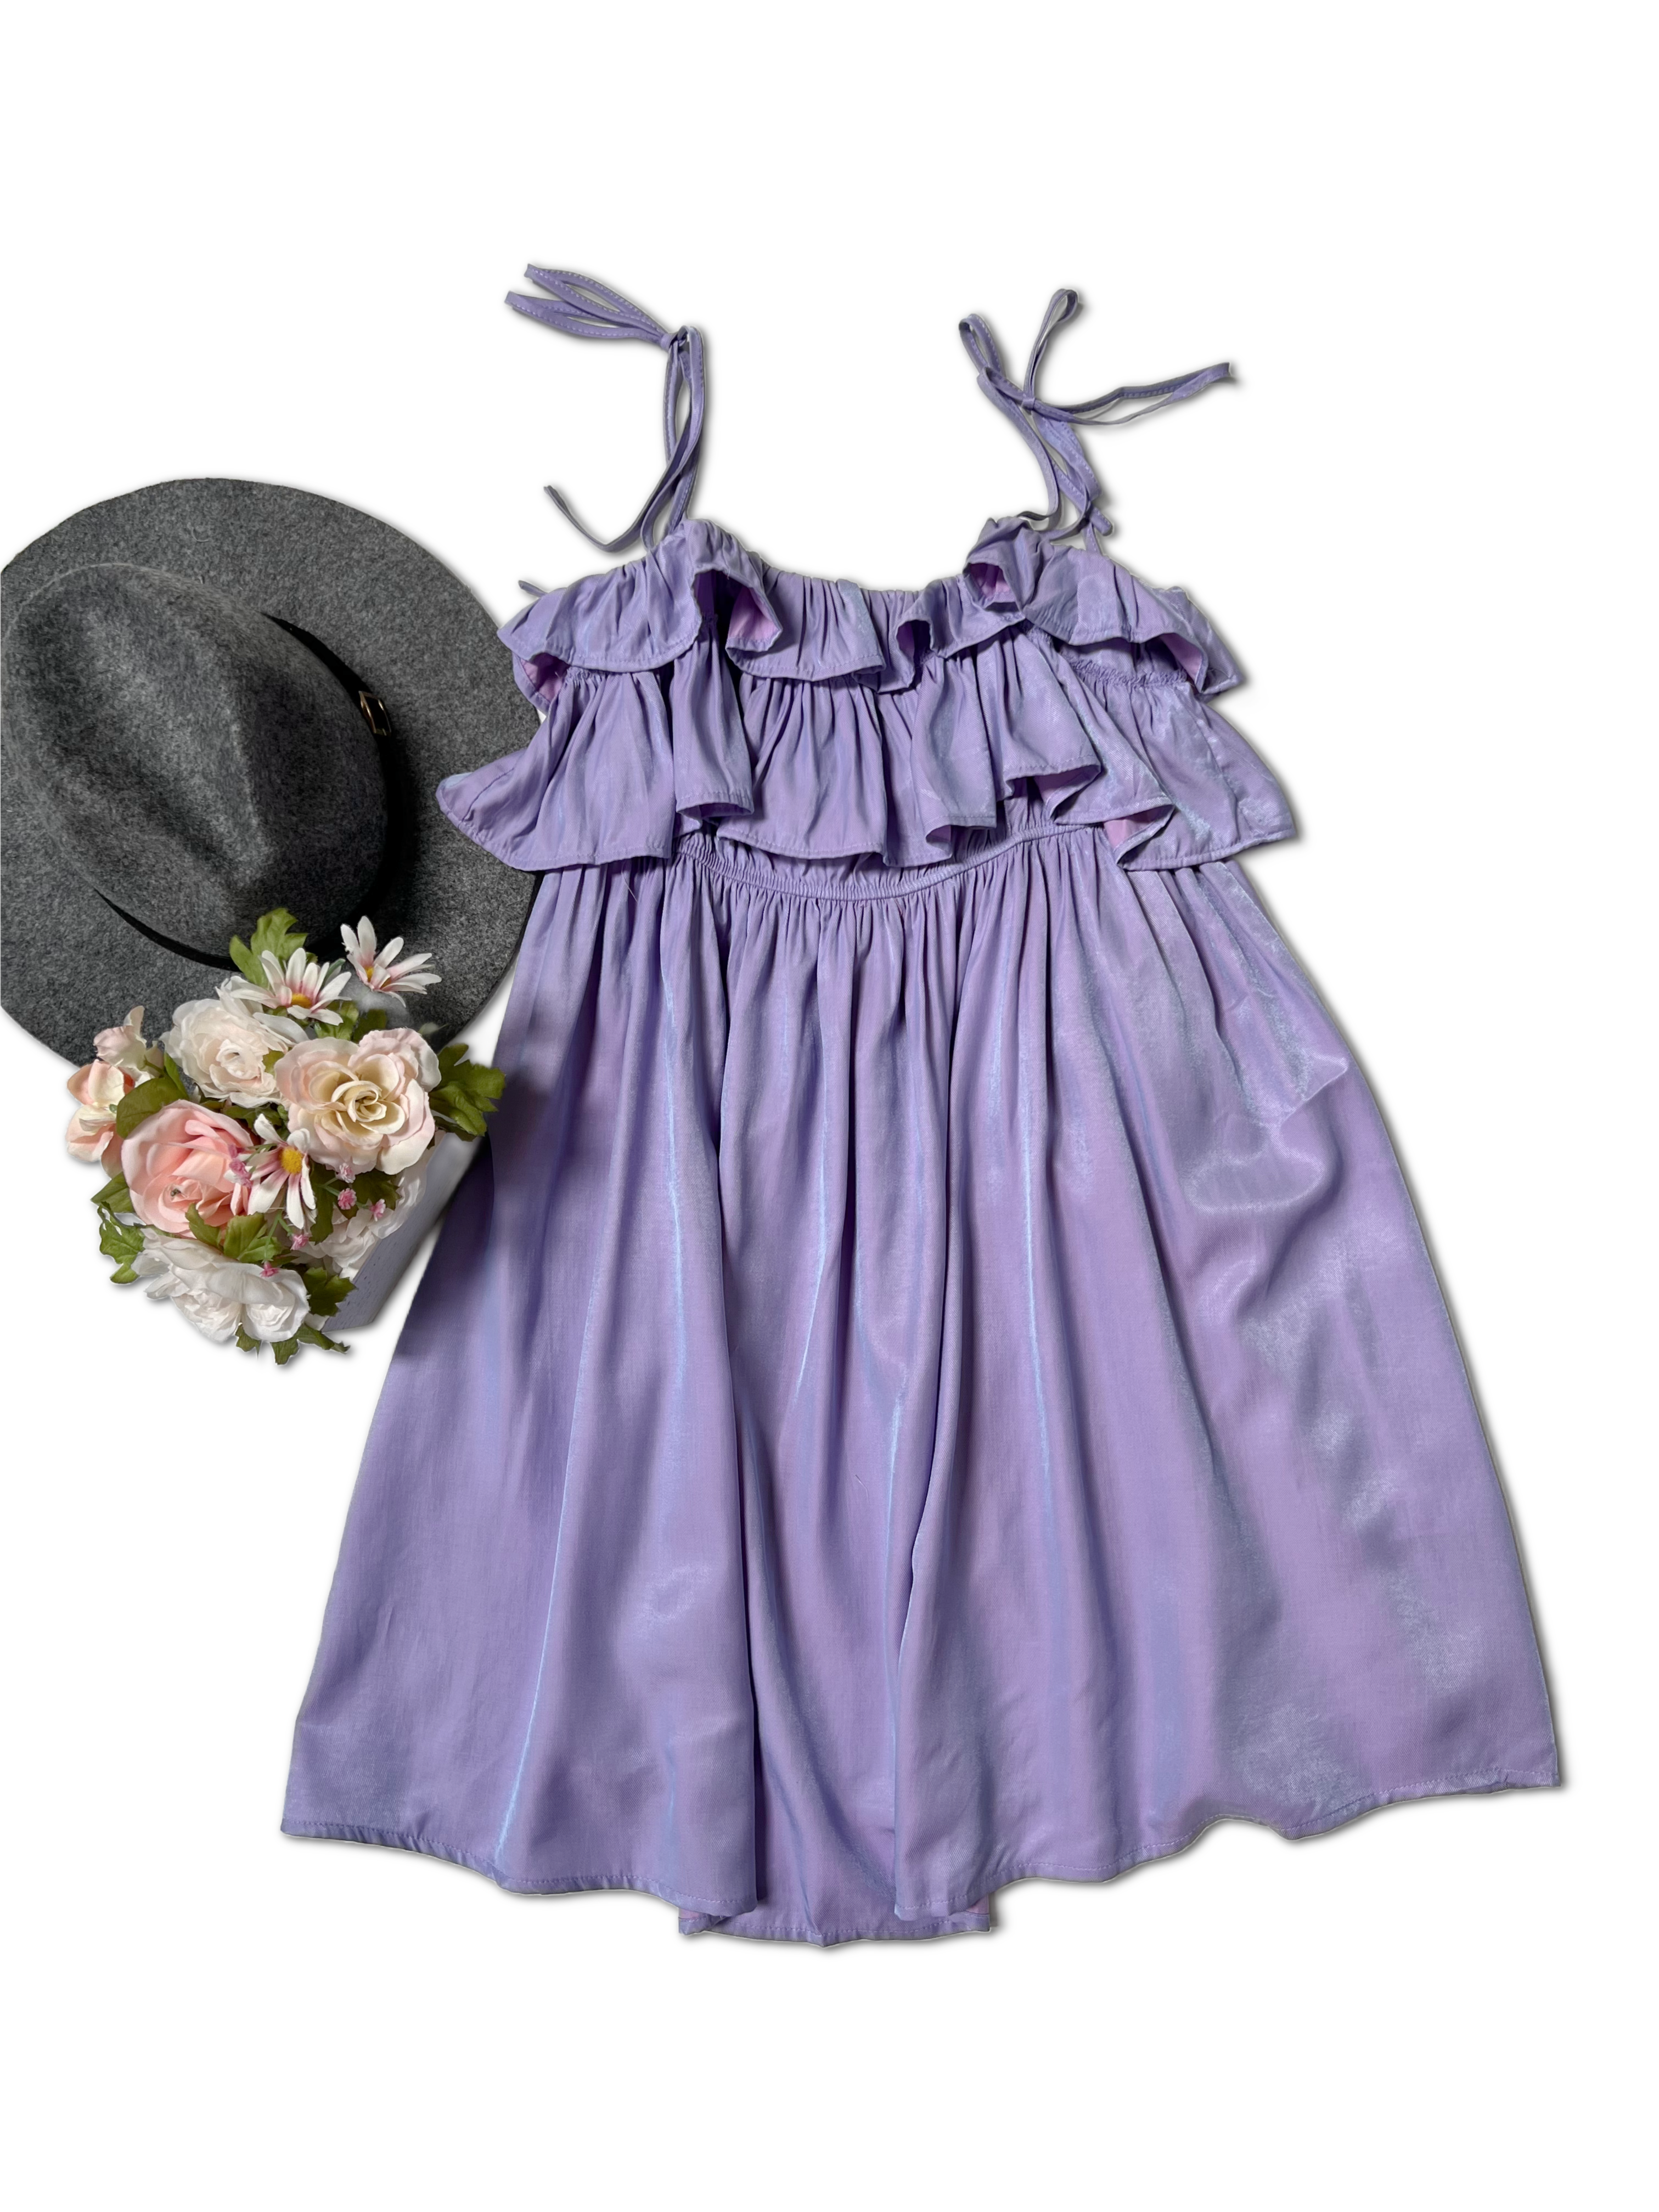 LLOVE Spring Has Sprung - Lavender Dress OOTD Boutique Simplified